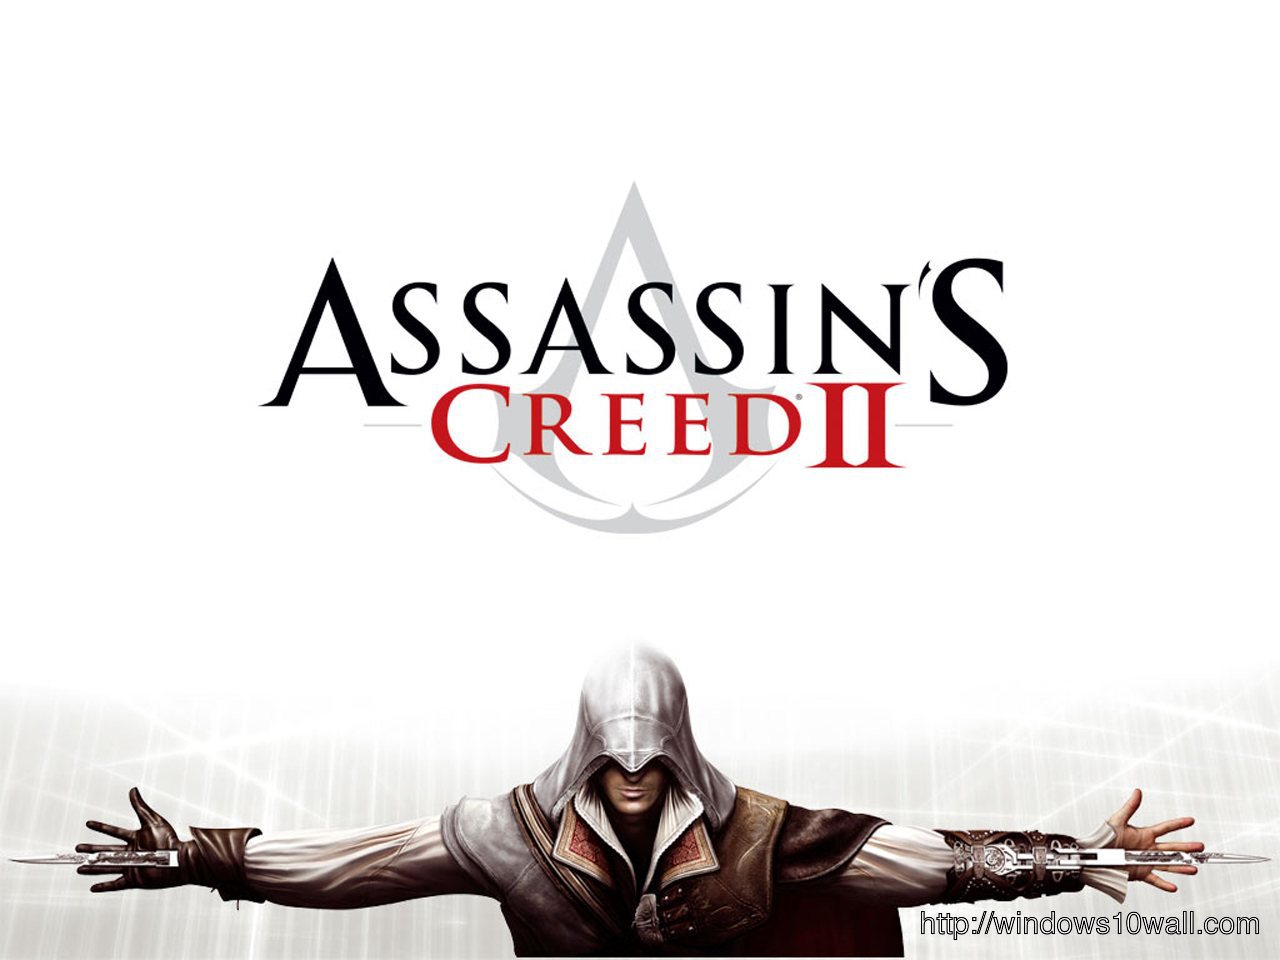 Welcome to the Assassin’s Creed 2 wallpaper